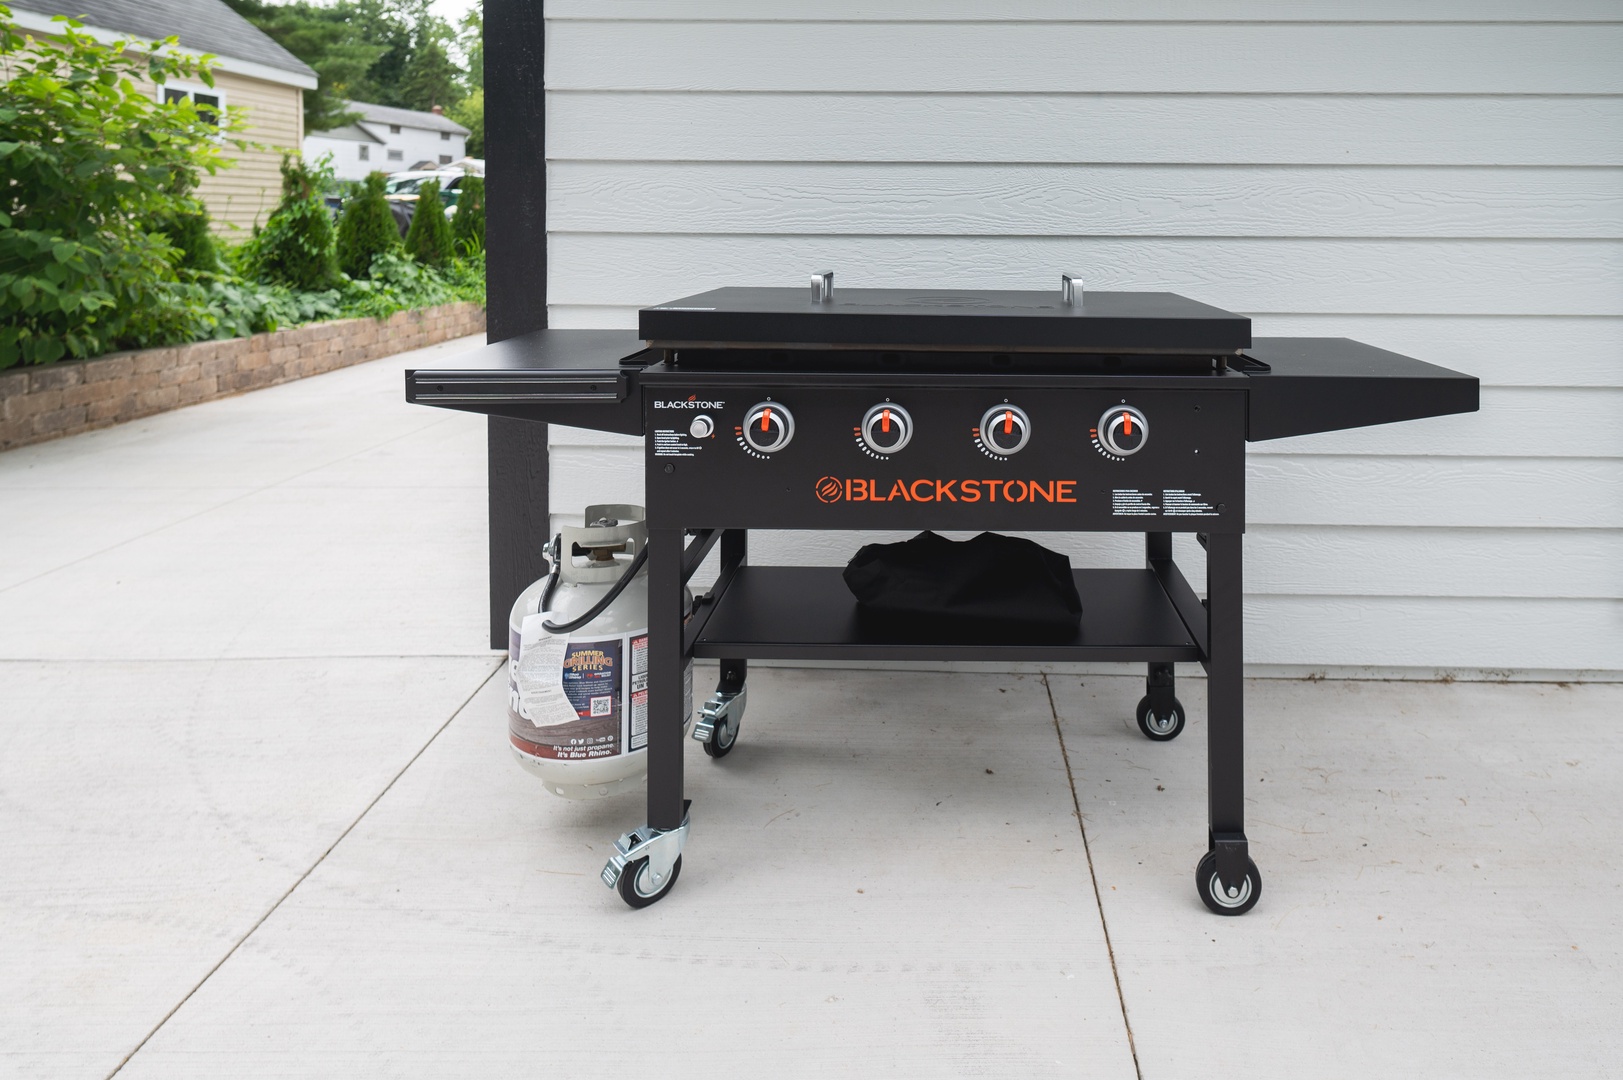 Outdoor seating and gas BBQ grill